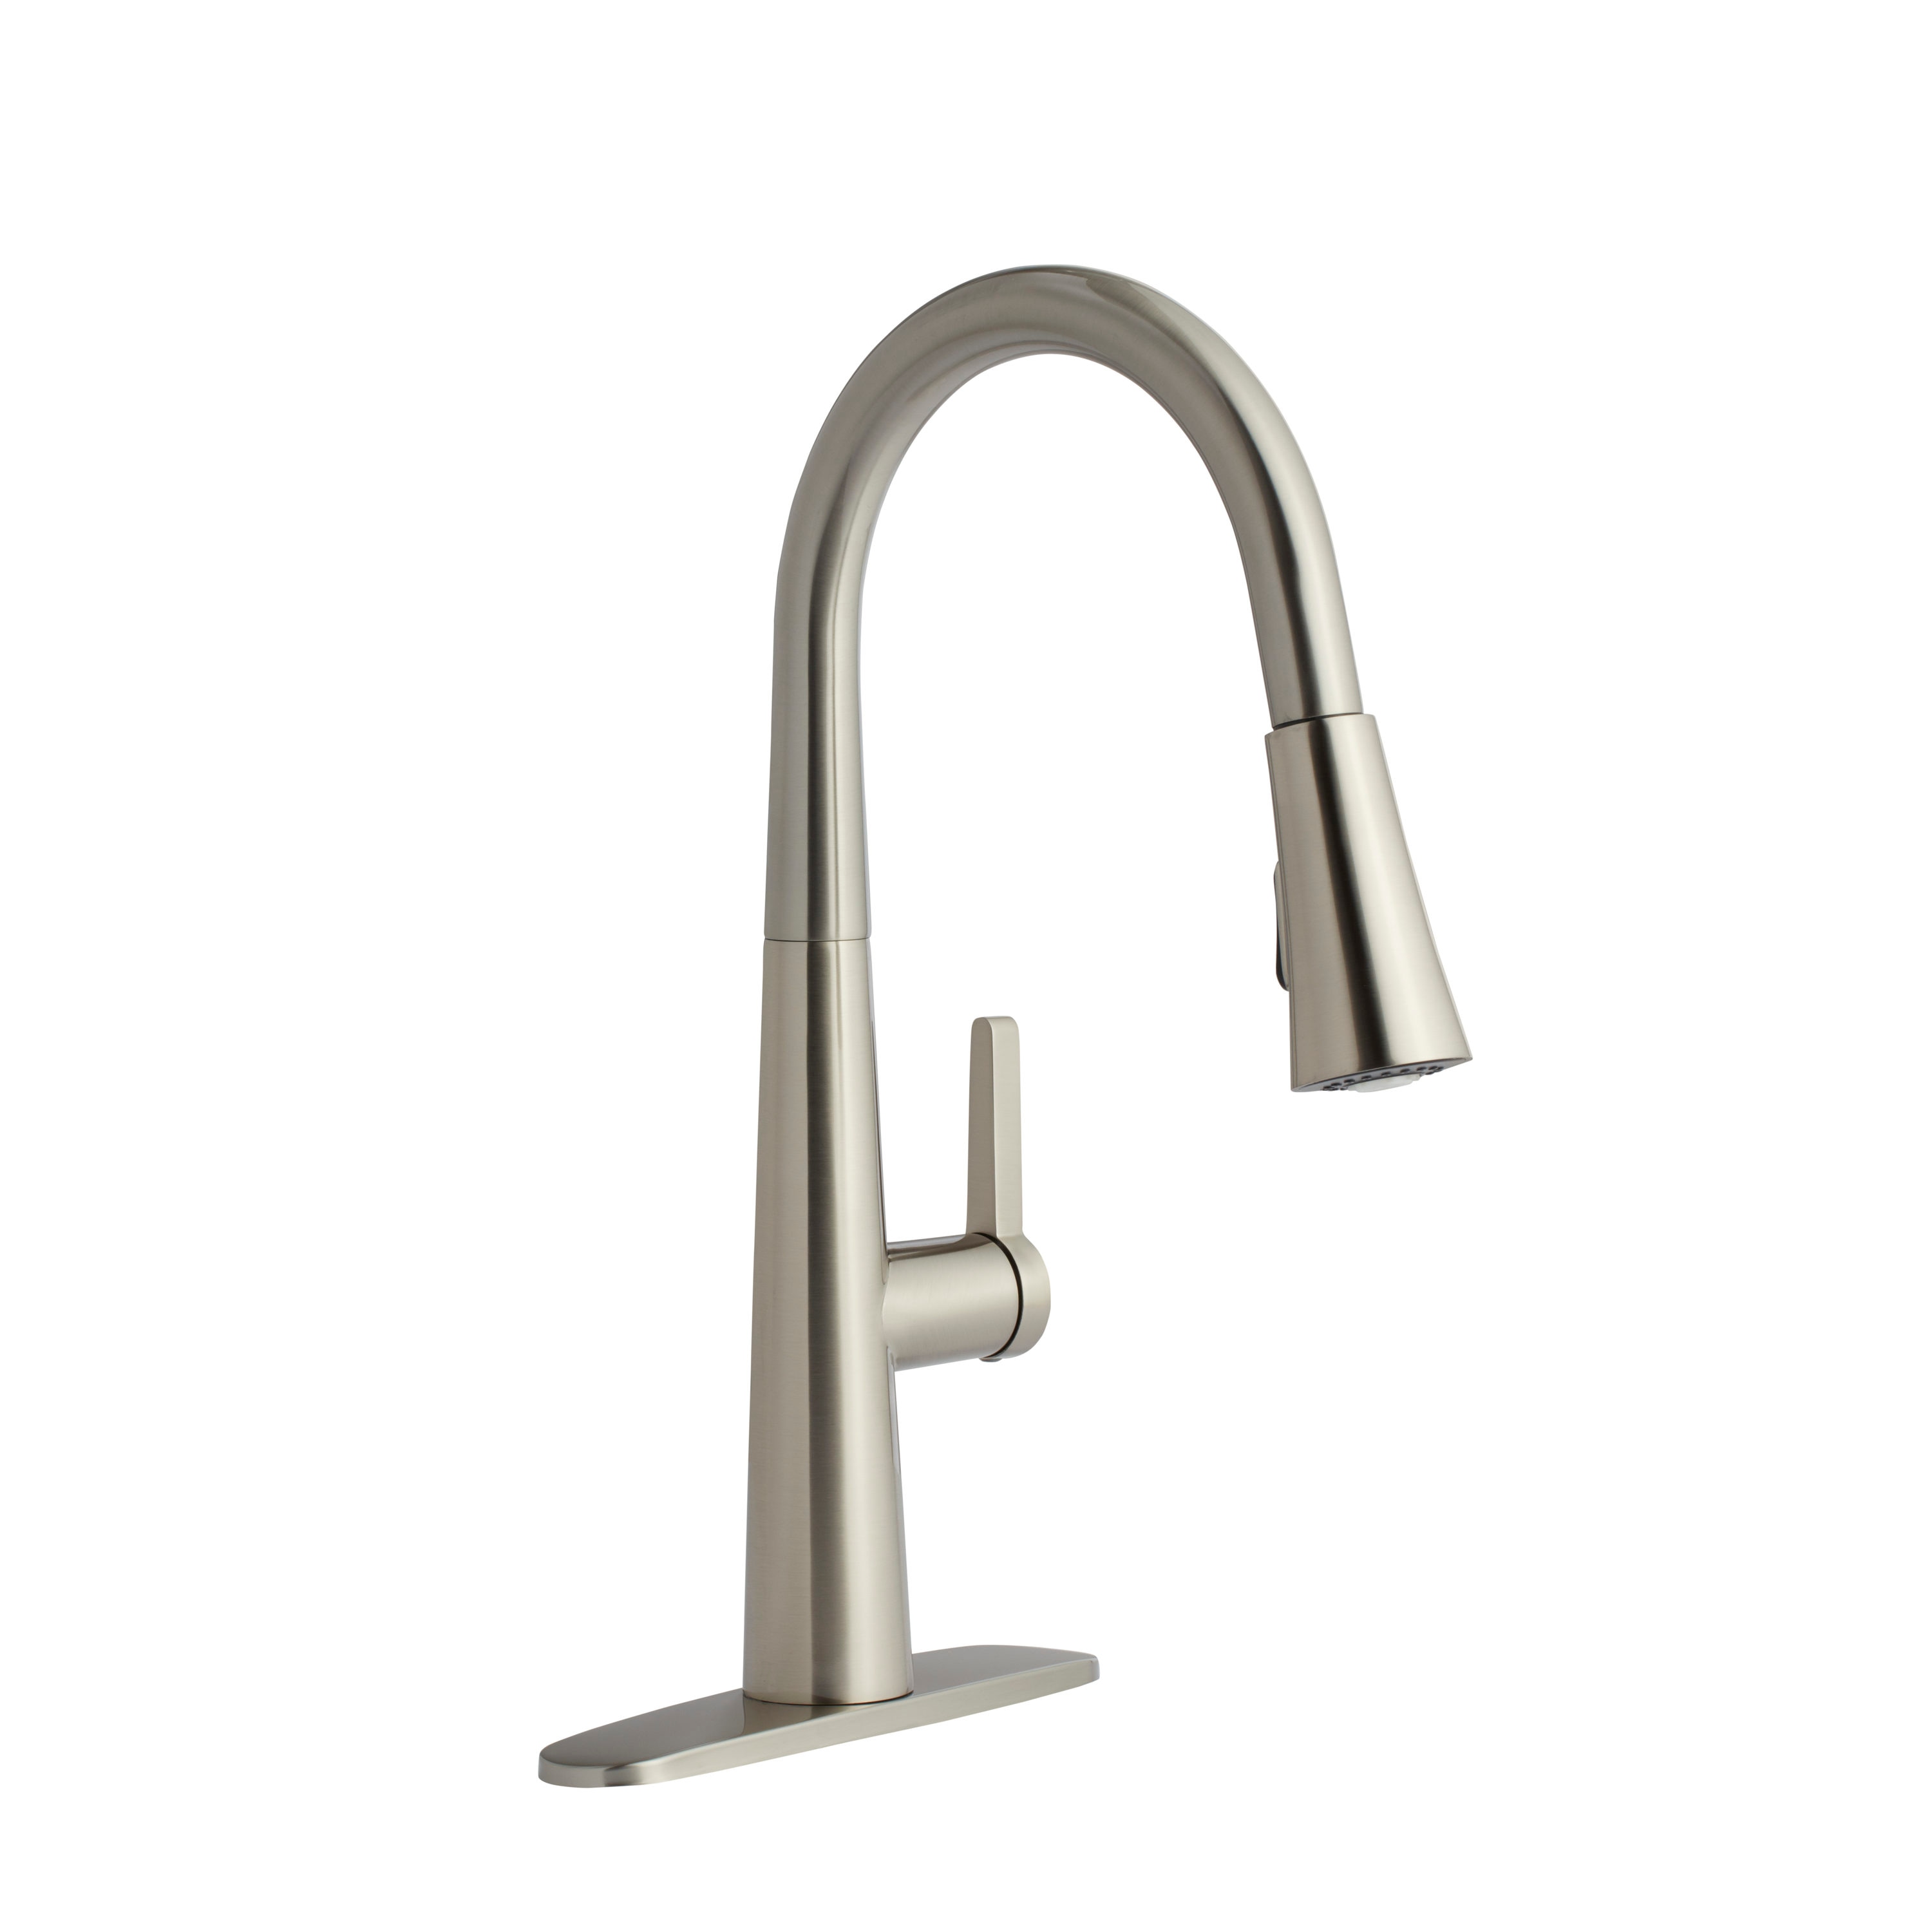 allen + roth Bryton Stainless Steel Single Handle Deck mount Pull down  Handle Kitchen Faucet Deck Plate Included